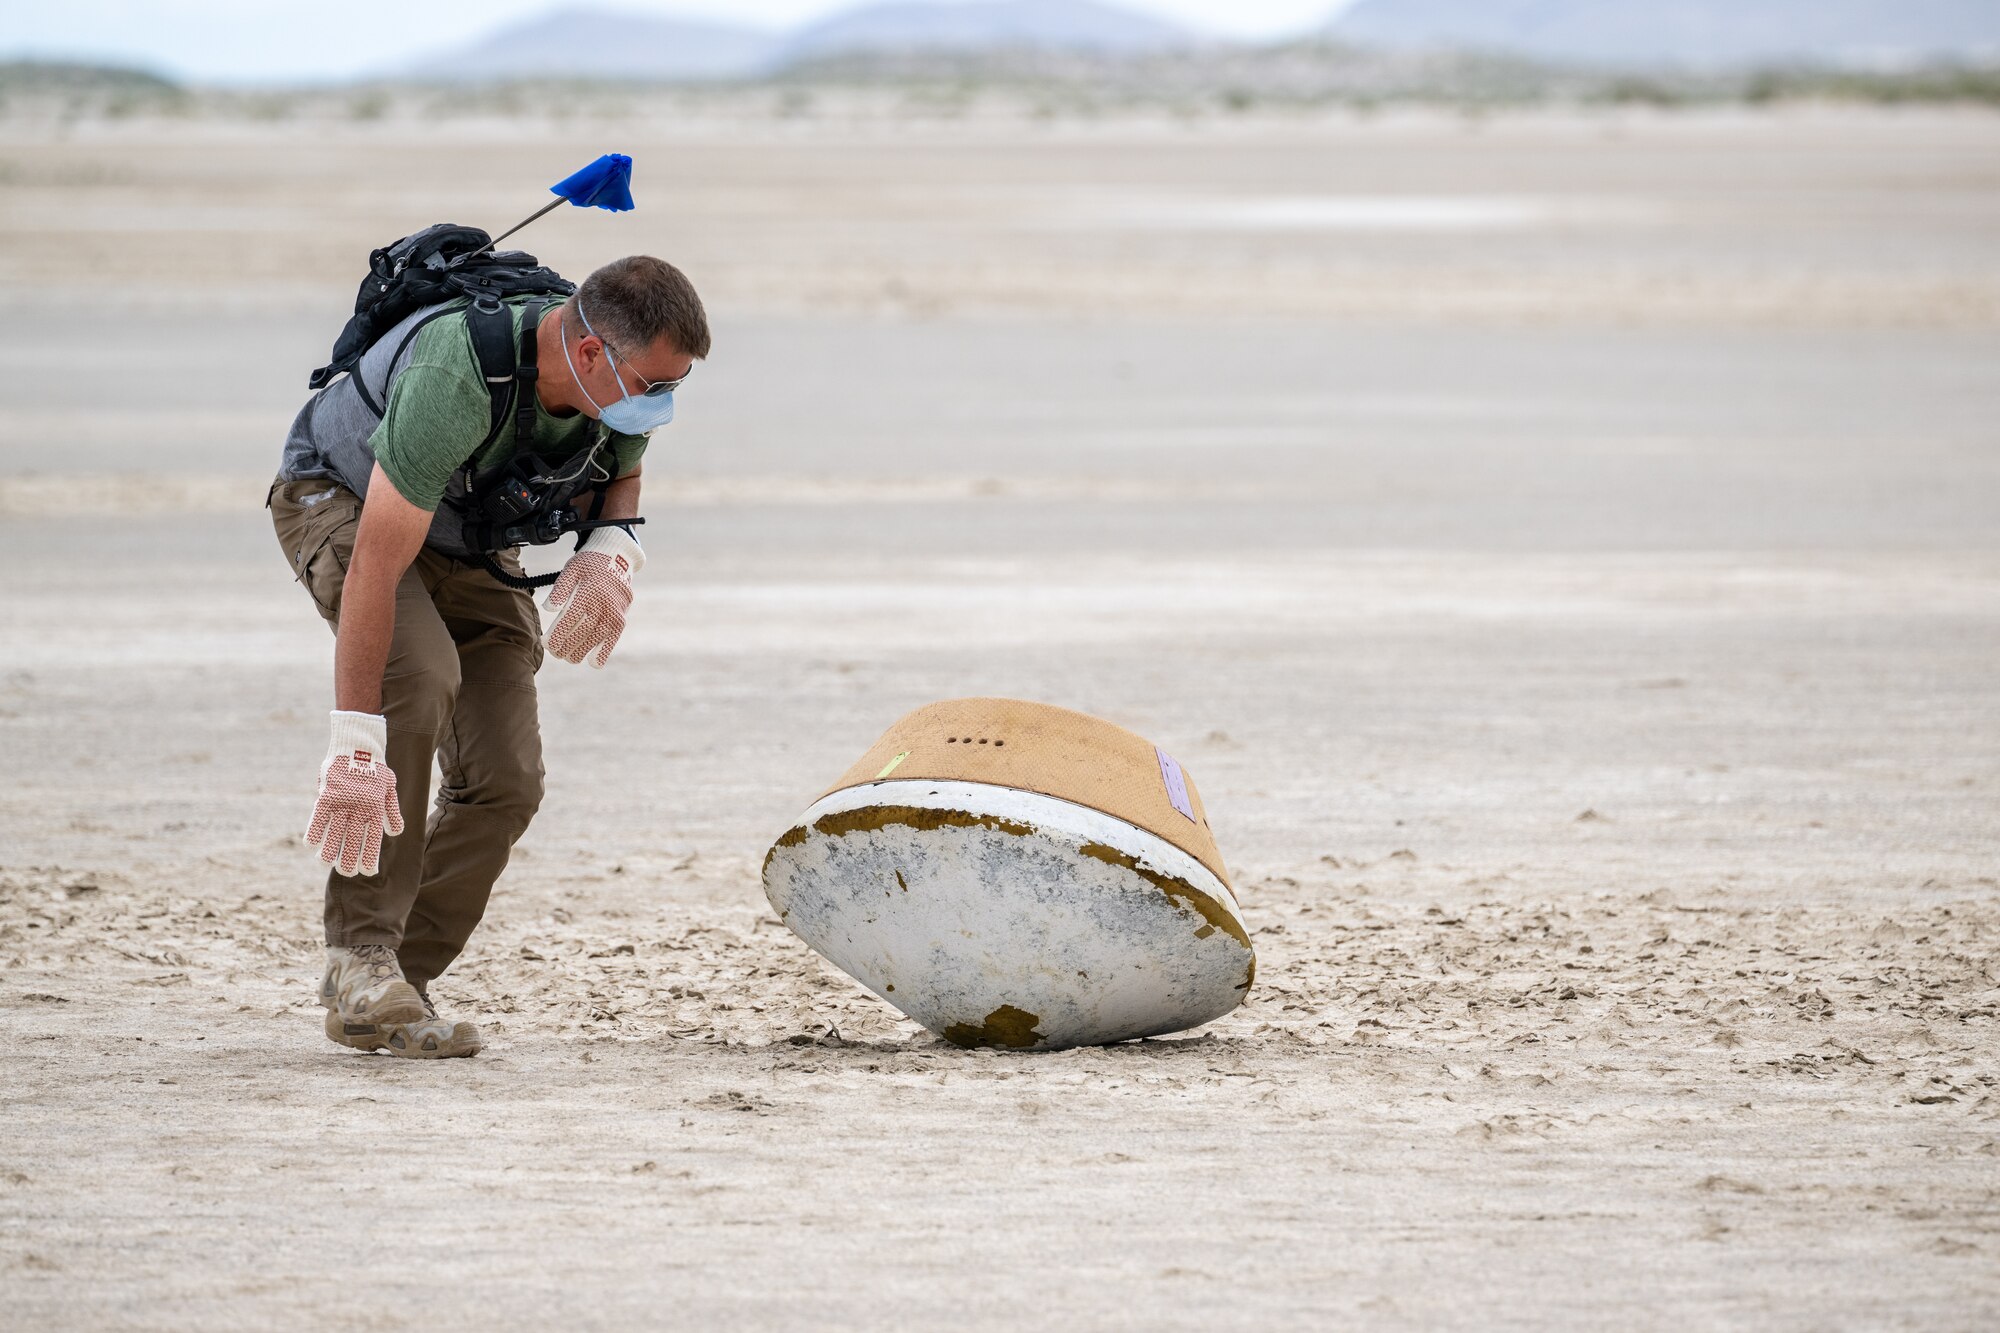 A photo of a man looking at a large, oval shaped recovery container laying in the desert.